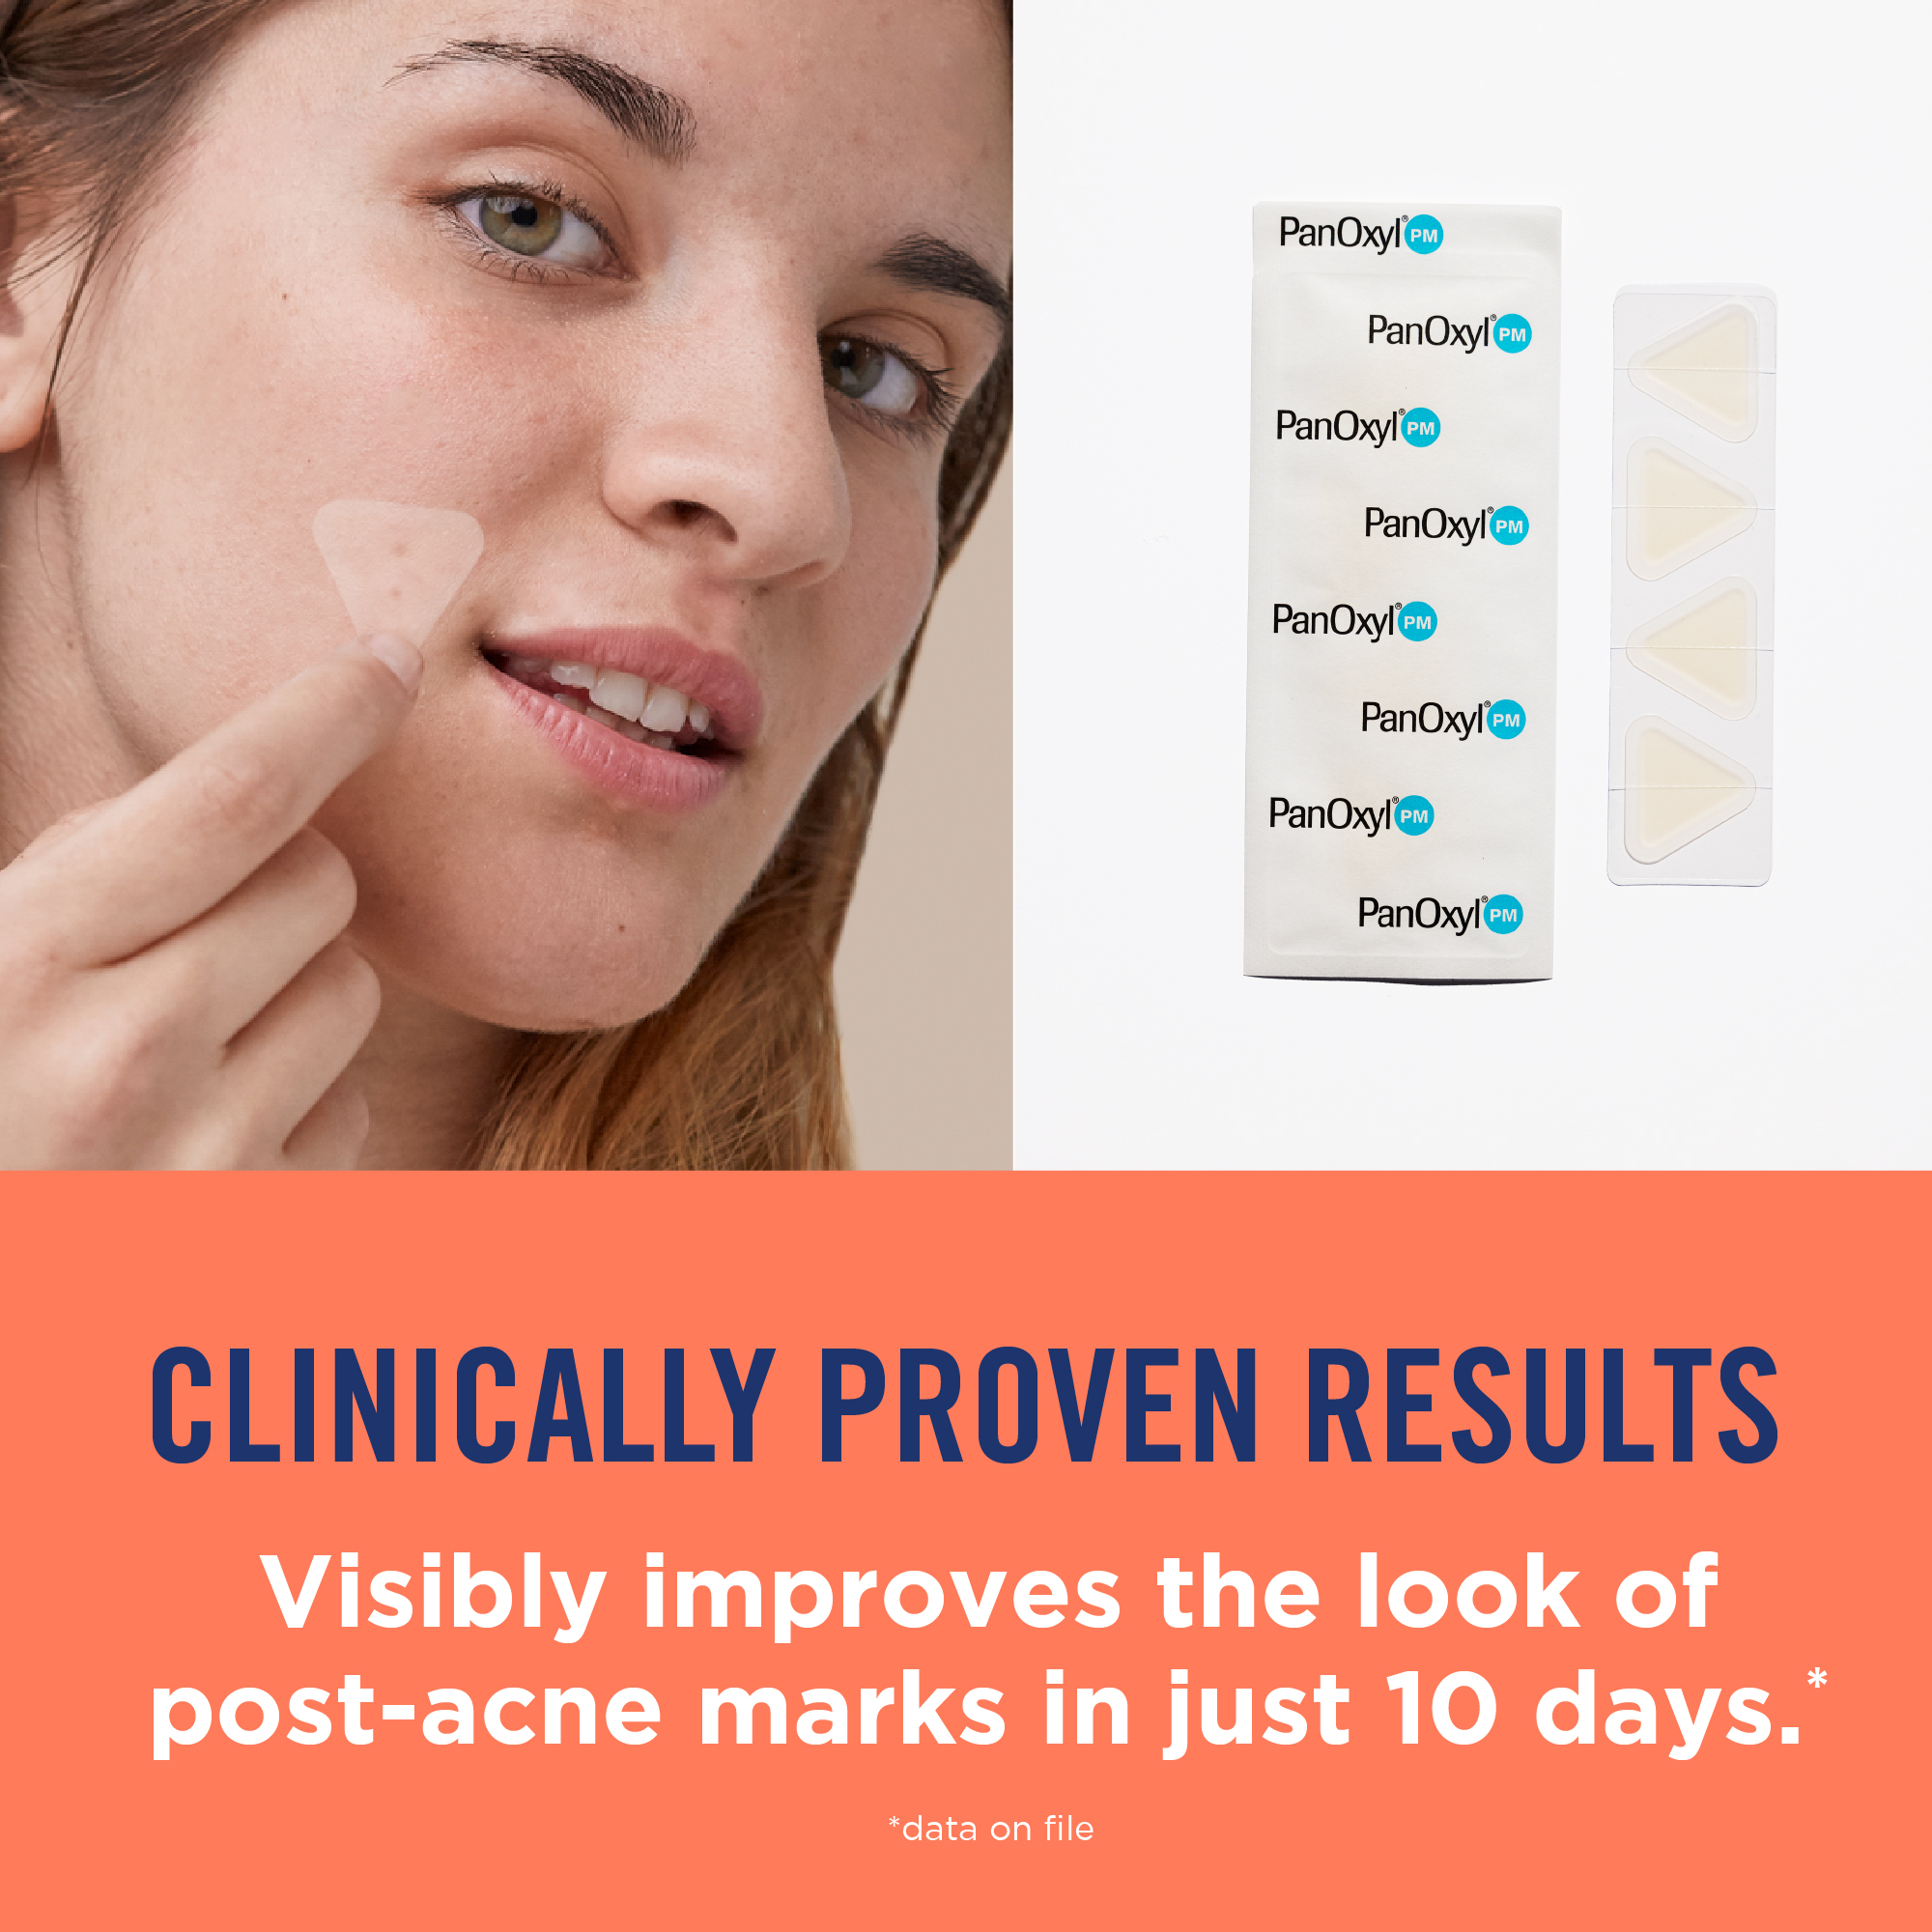 Woman applying patches. Clinically proven results - Visibly improves the look of post-acne marks in just 10 days. (data on file)